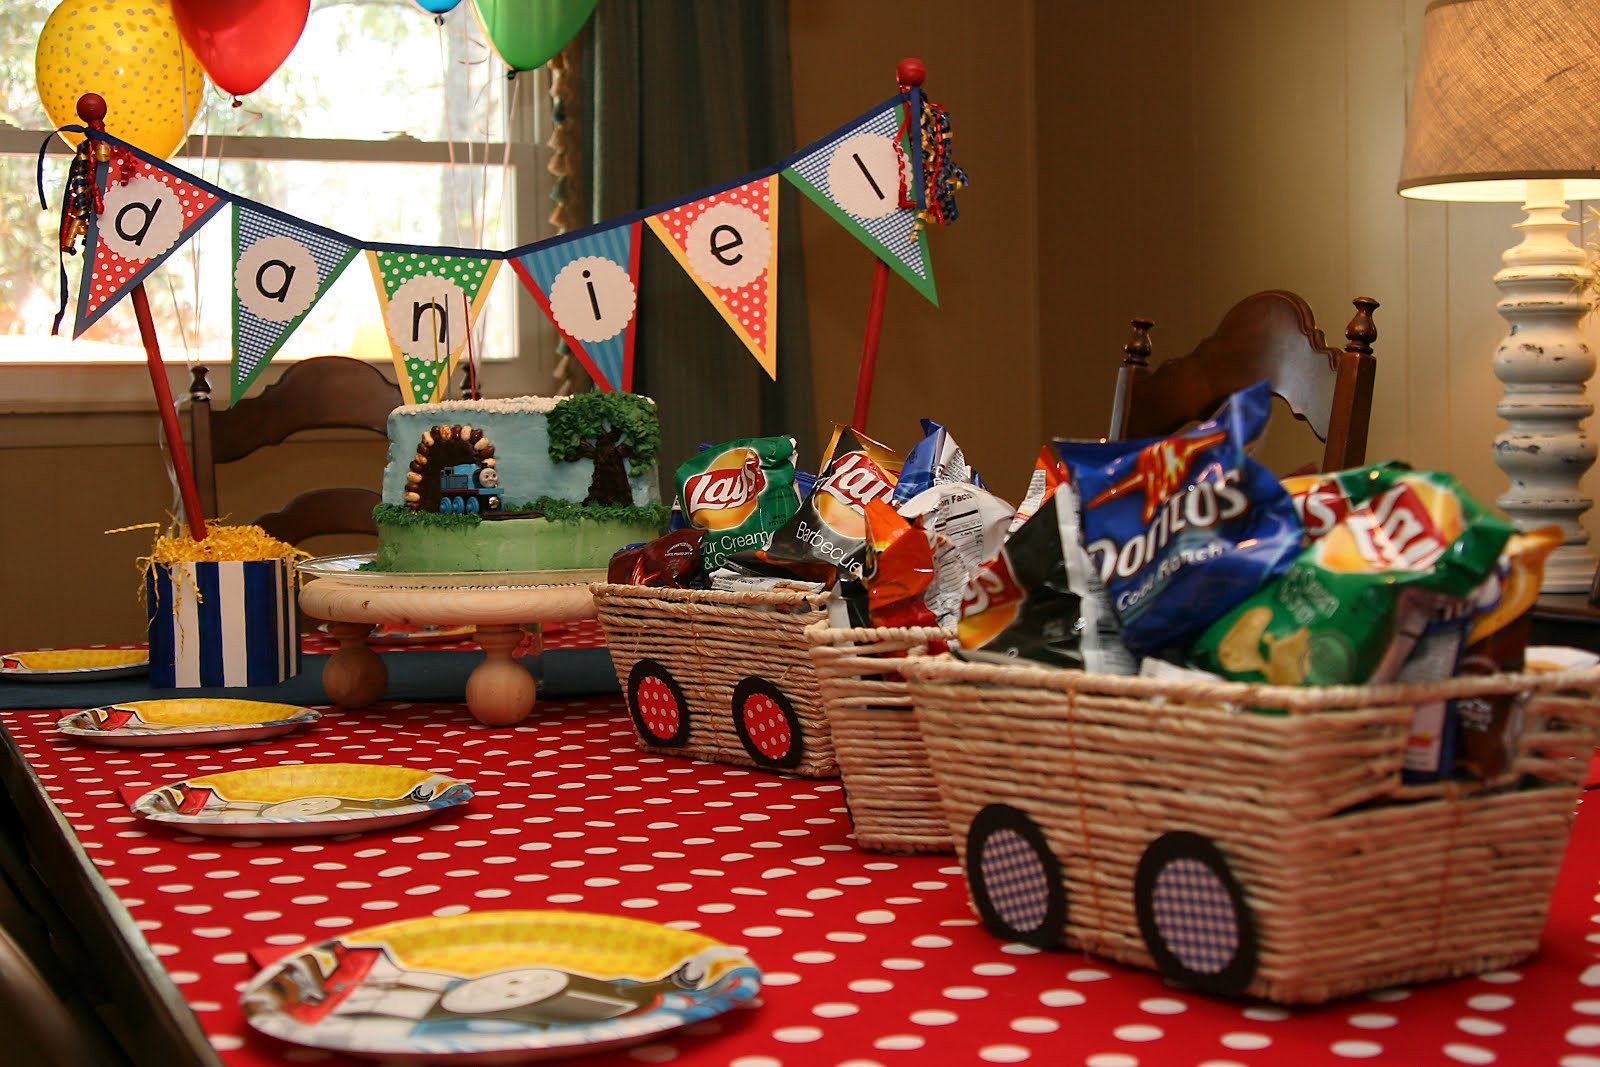 3Rd Birthday Party Food Ideas
 The Butlers Daniel s 3rd Birthday Party